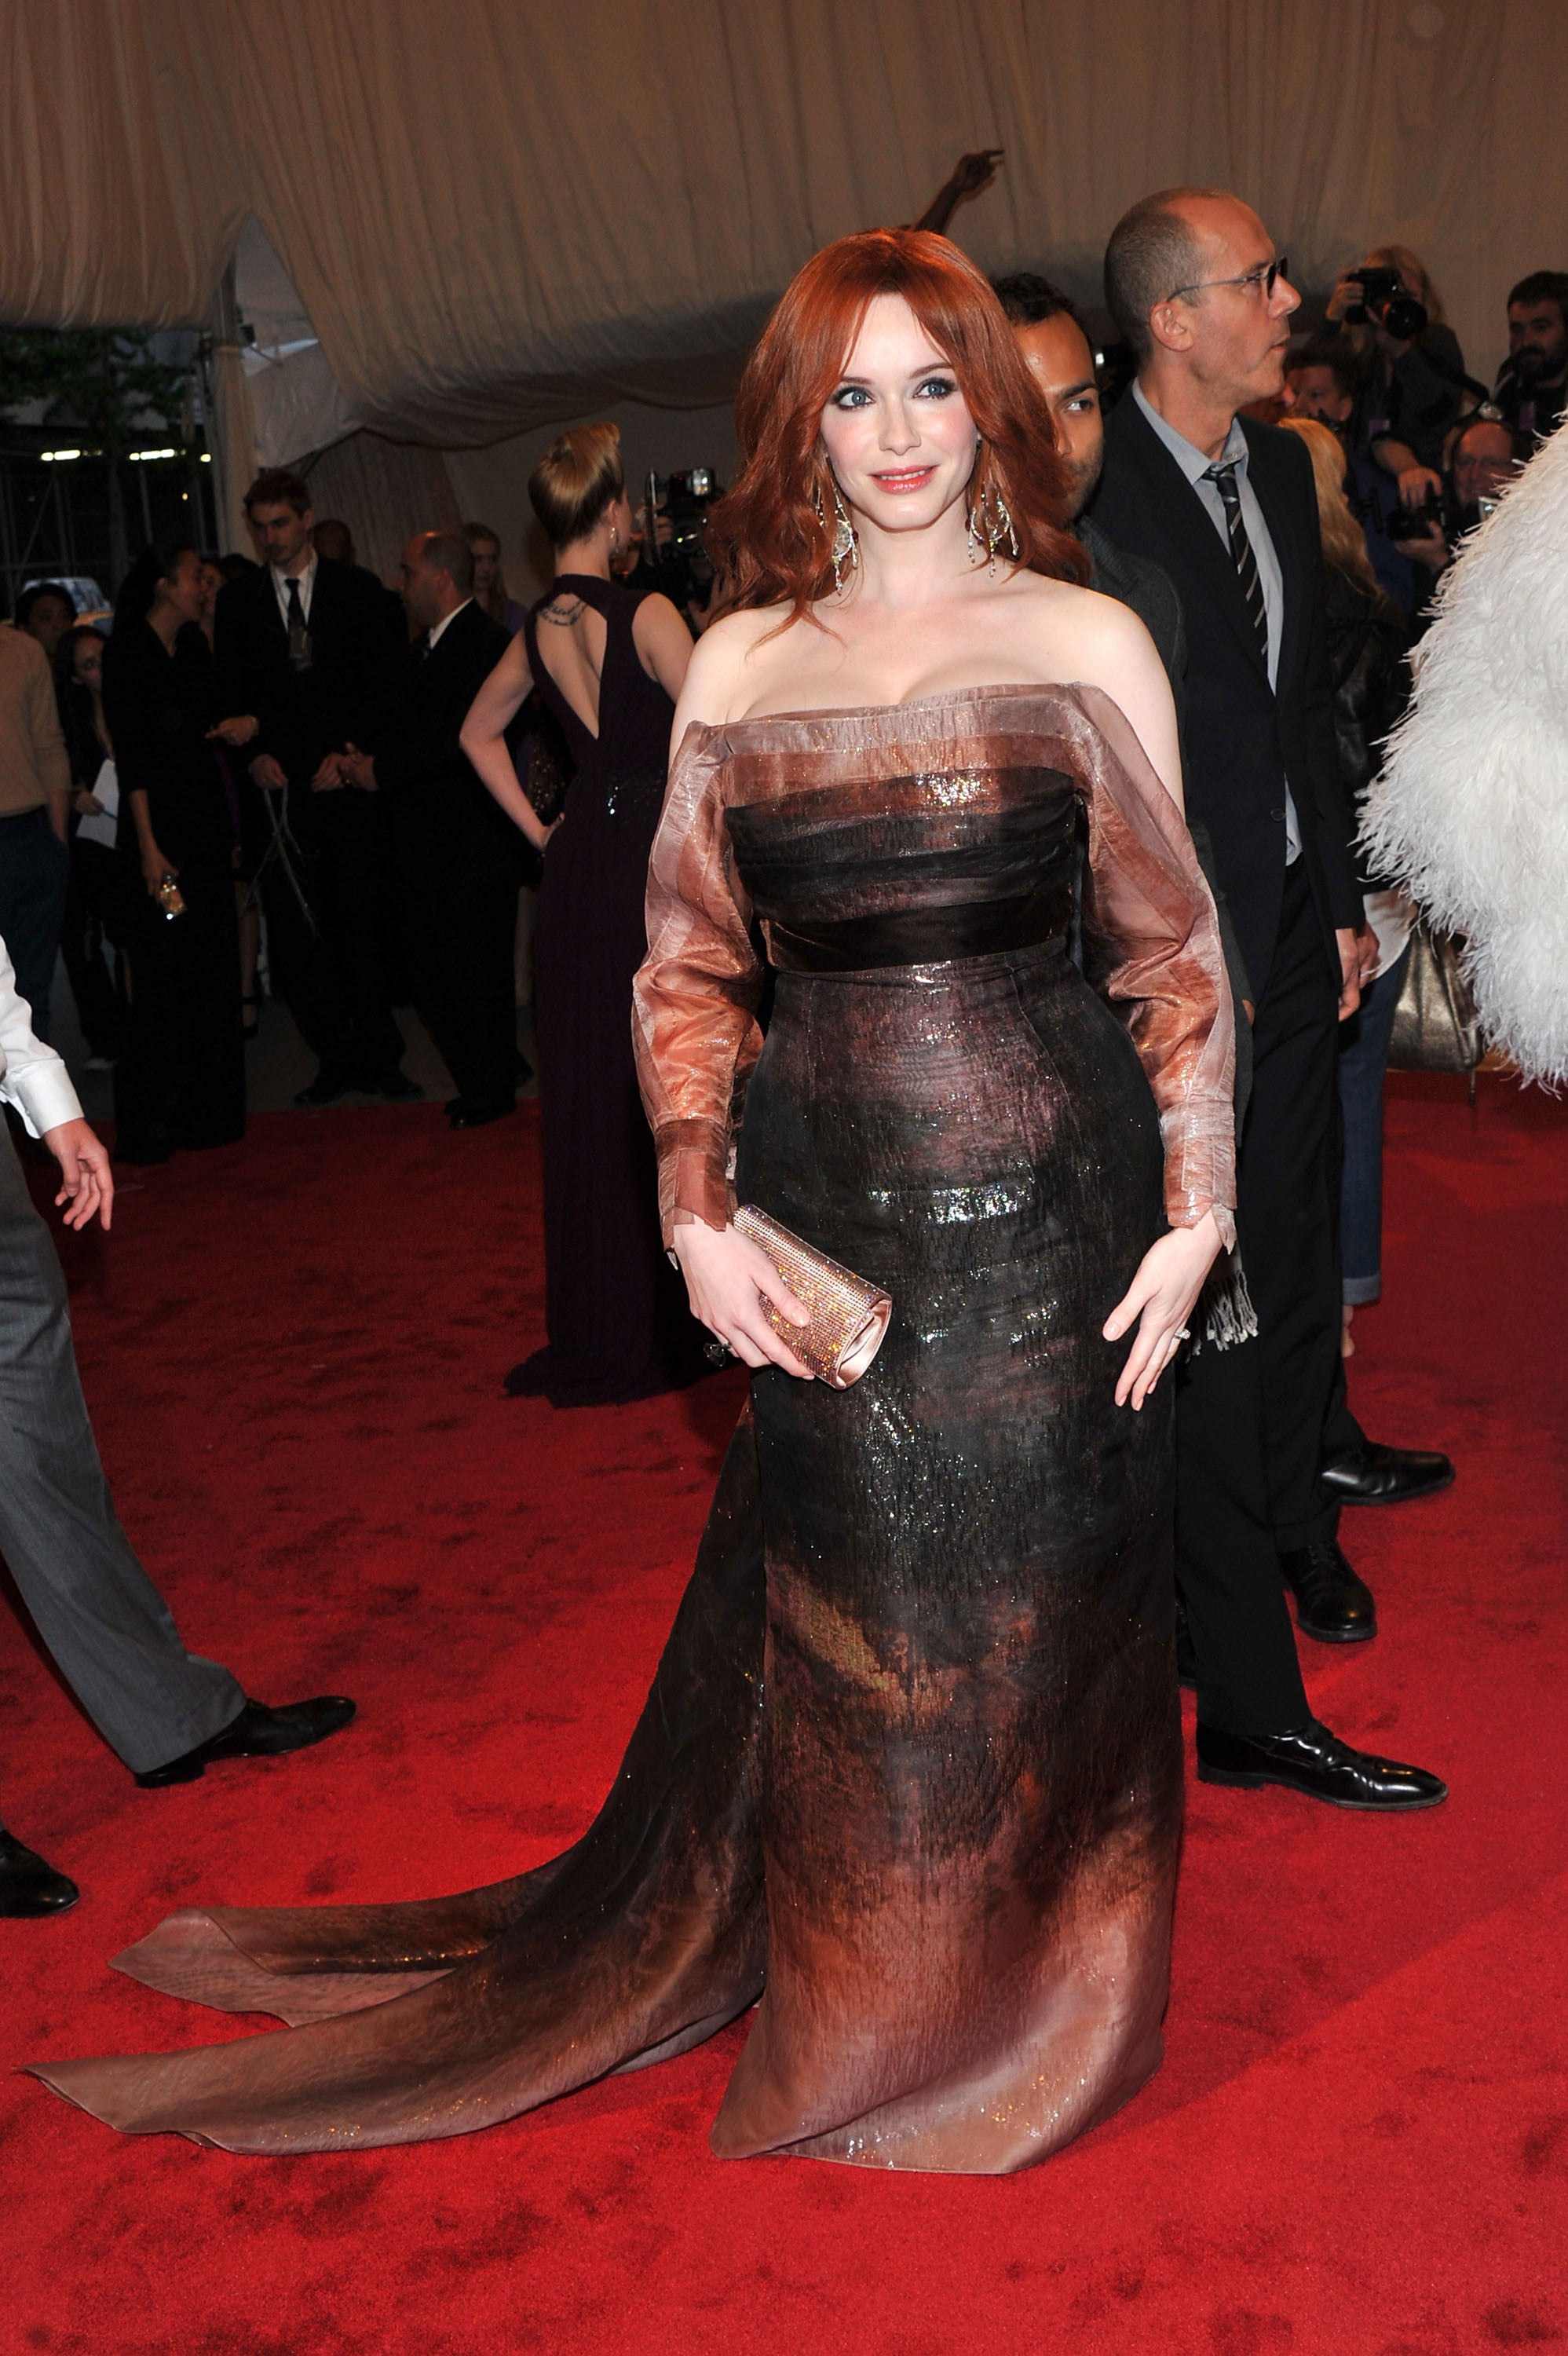 Pictures of the Red Carpet at the 2011 Met Costume Institute Gala ...